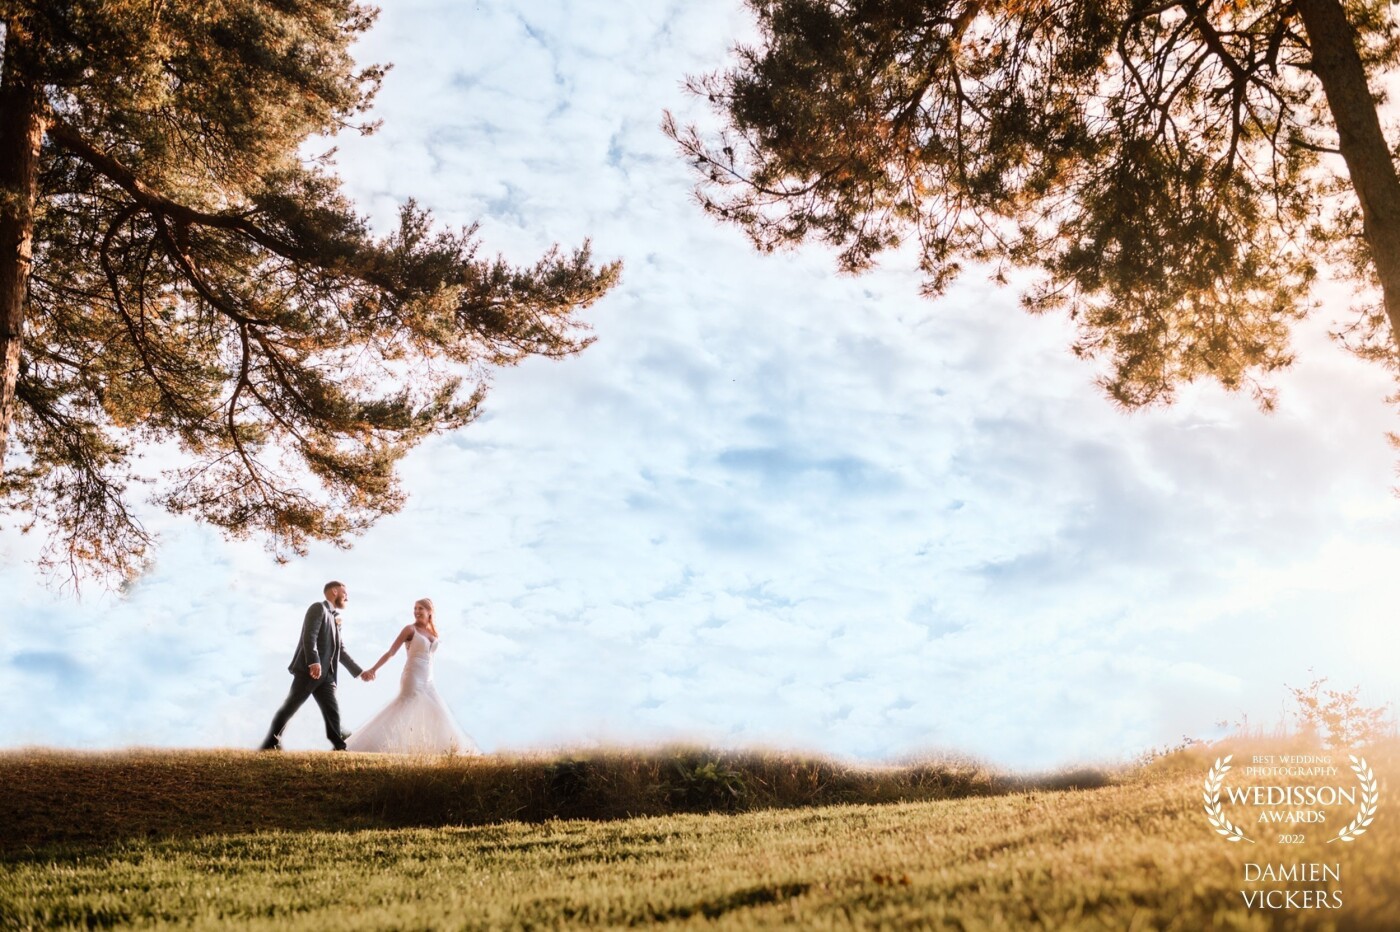 I had spotted this ridge earlier in the day and liked how was framed by the trees on either side. I thought the clean background of the sky would make for a good walking shot. The couple had a real sense of fun and although it's a wide shot, you can still feel their connection.